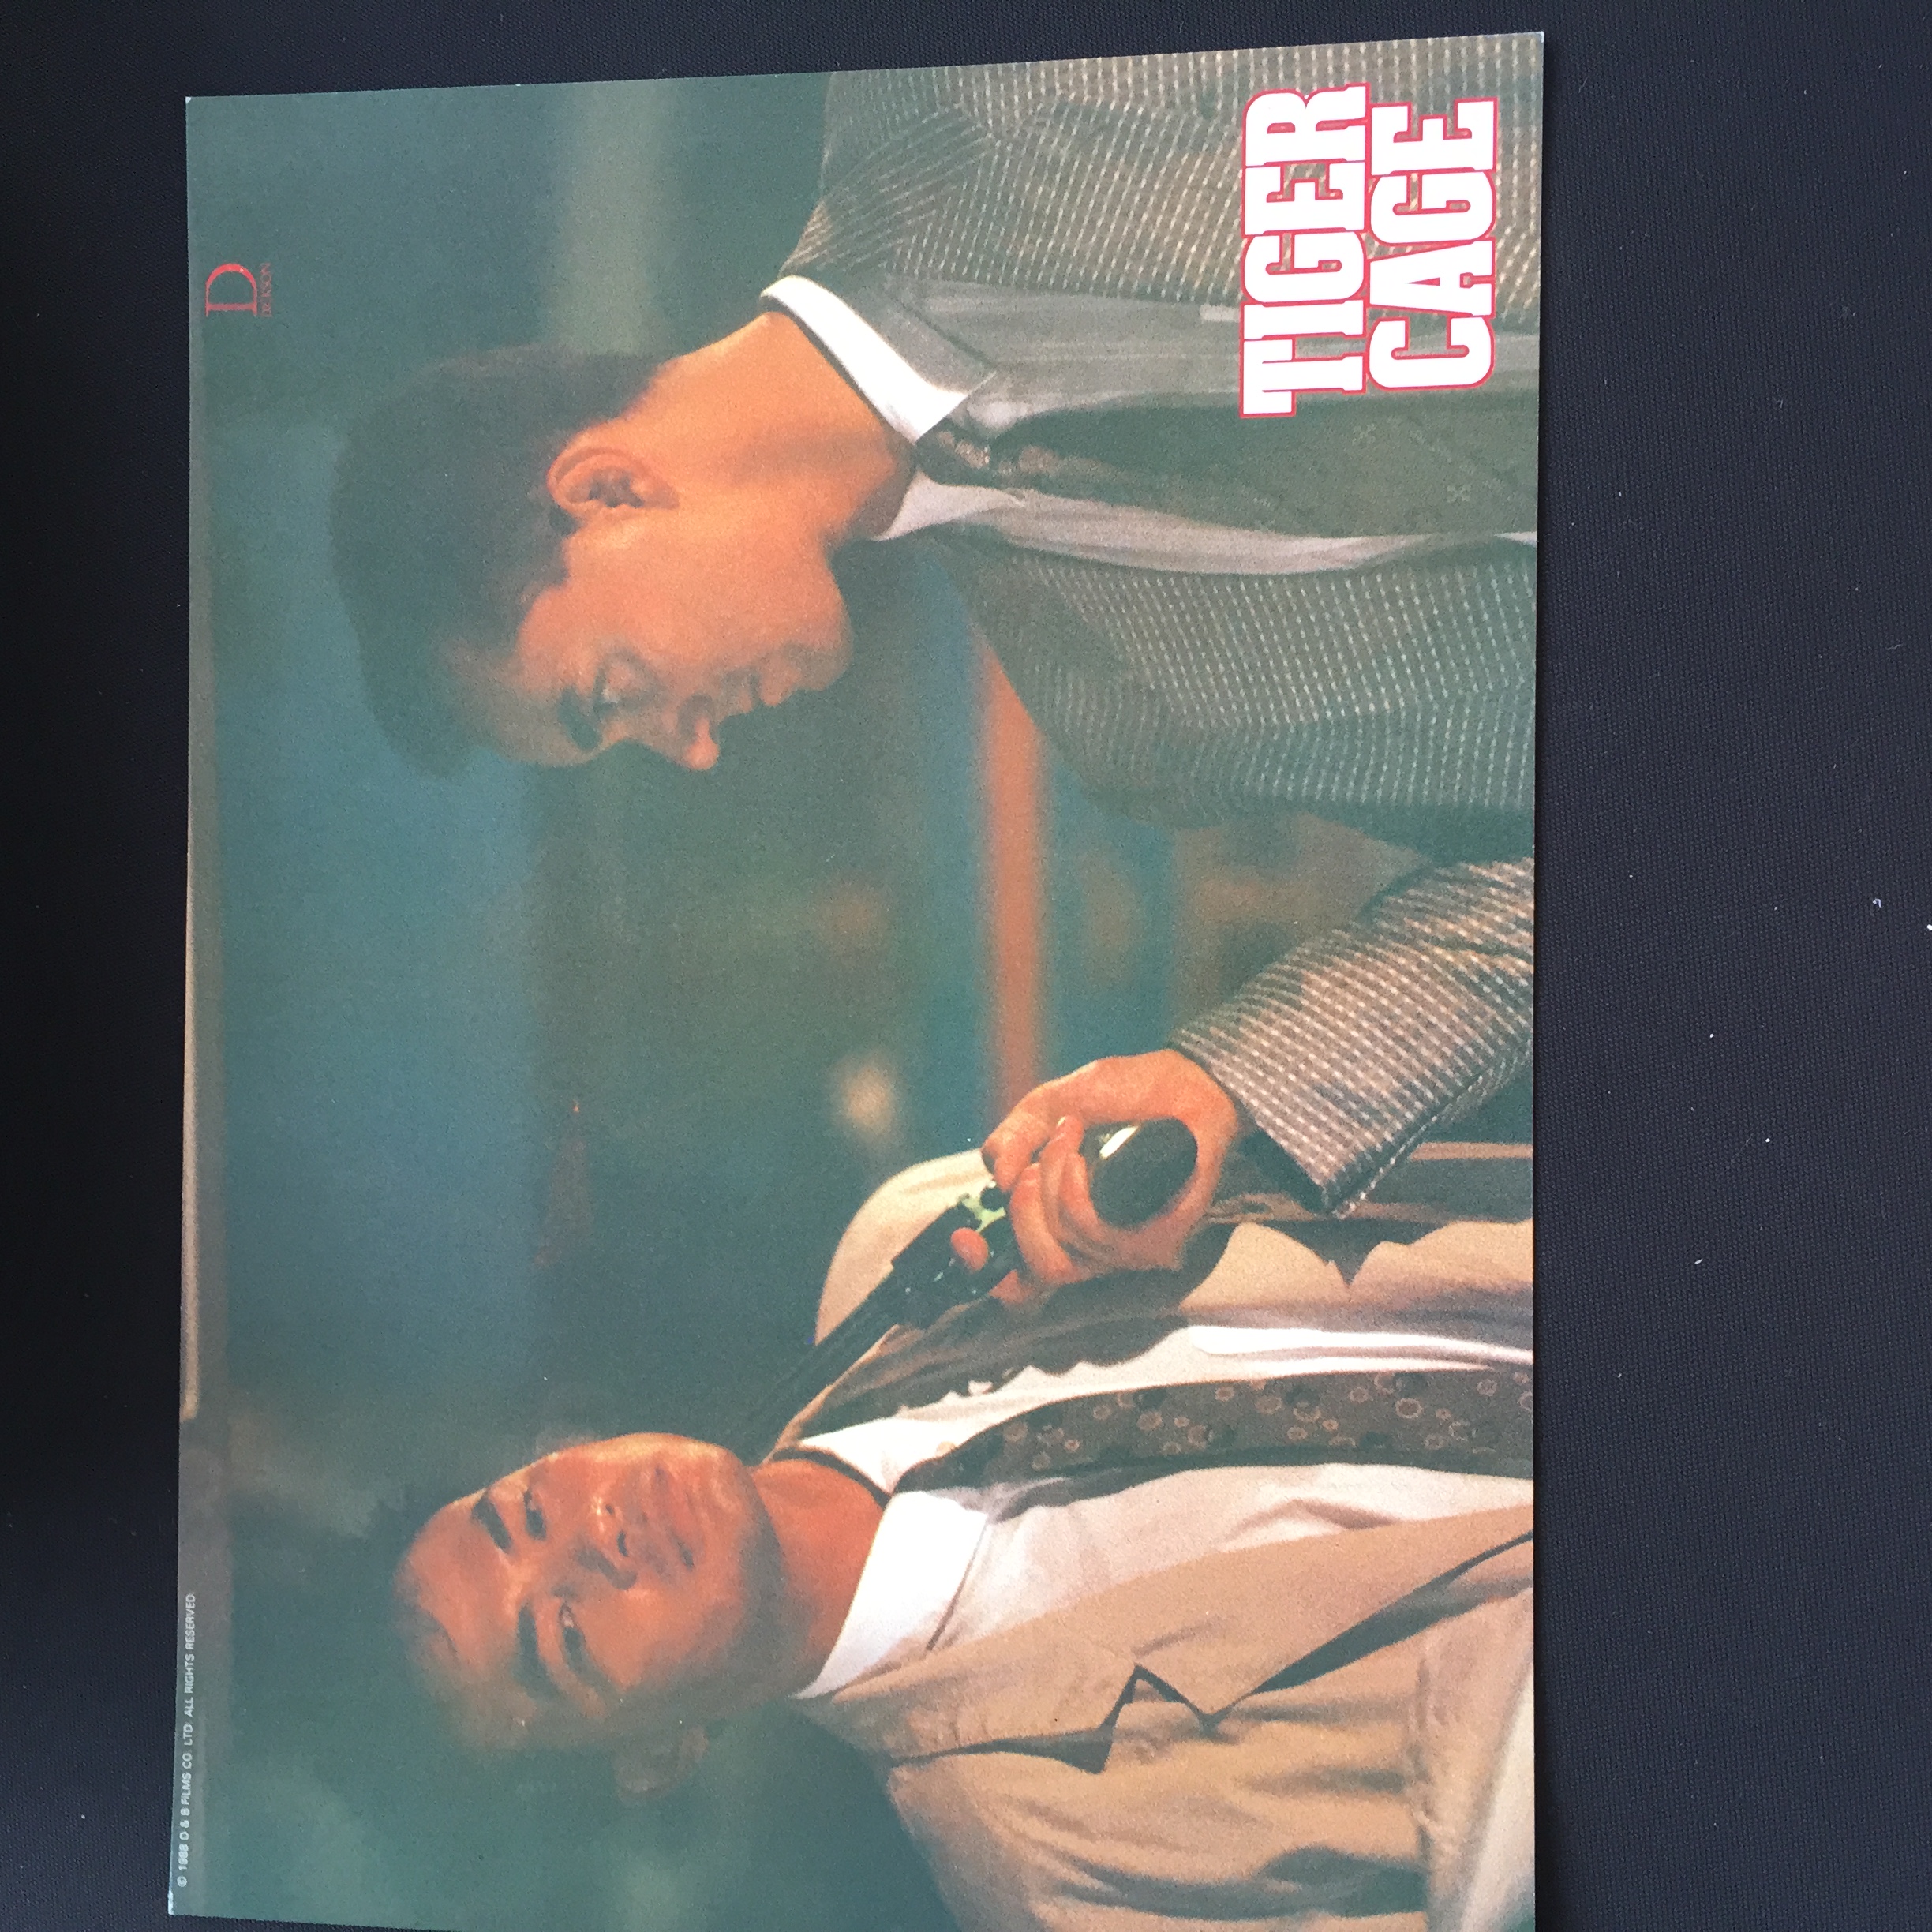 Tiger Cage - Lobby Film Card here with Simon Yam